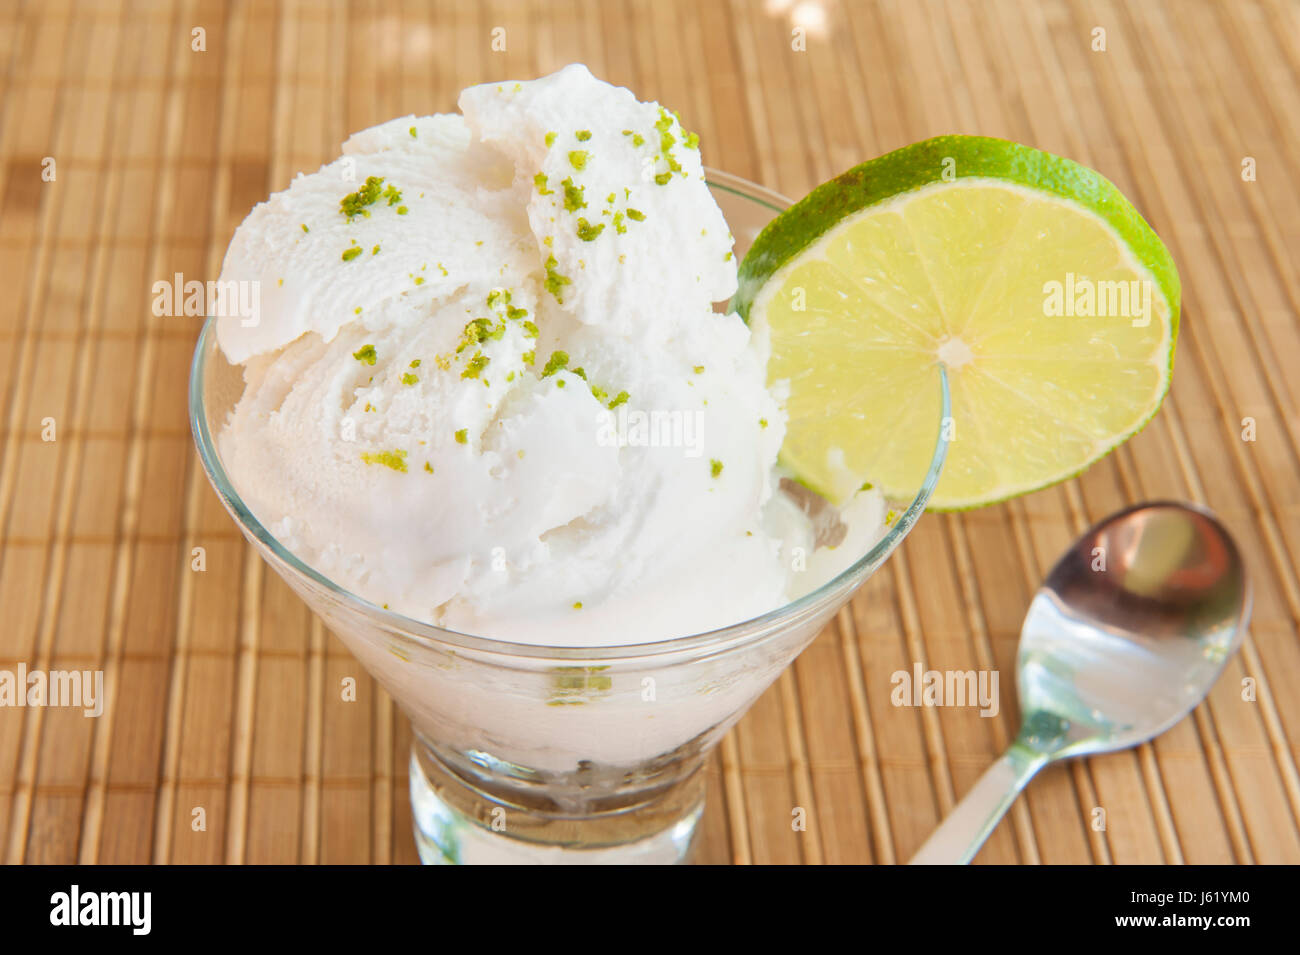 Healthy coconut lime dairy-free ice cream on a bamboo mat Stock Photo